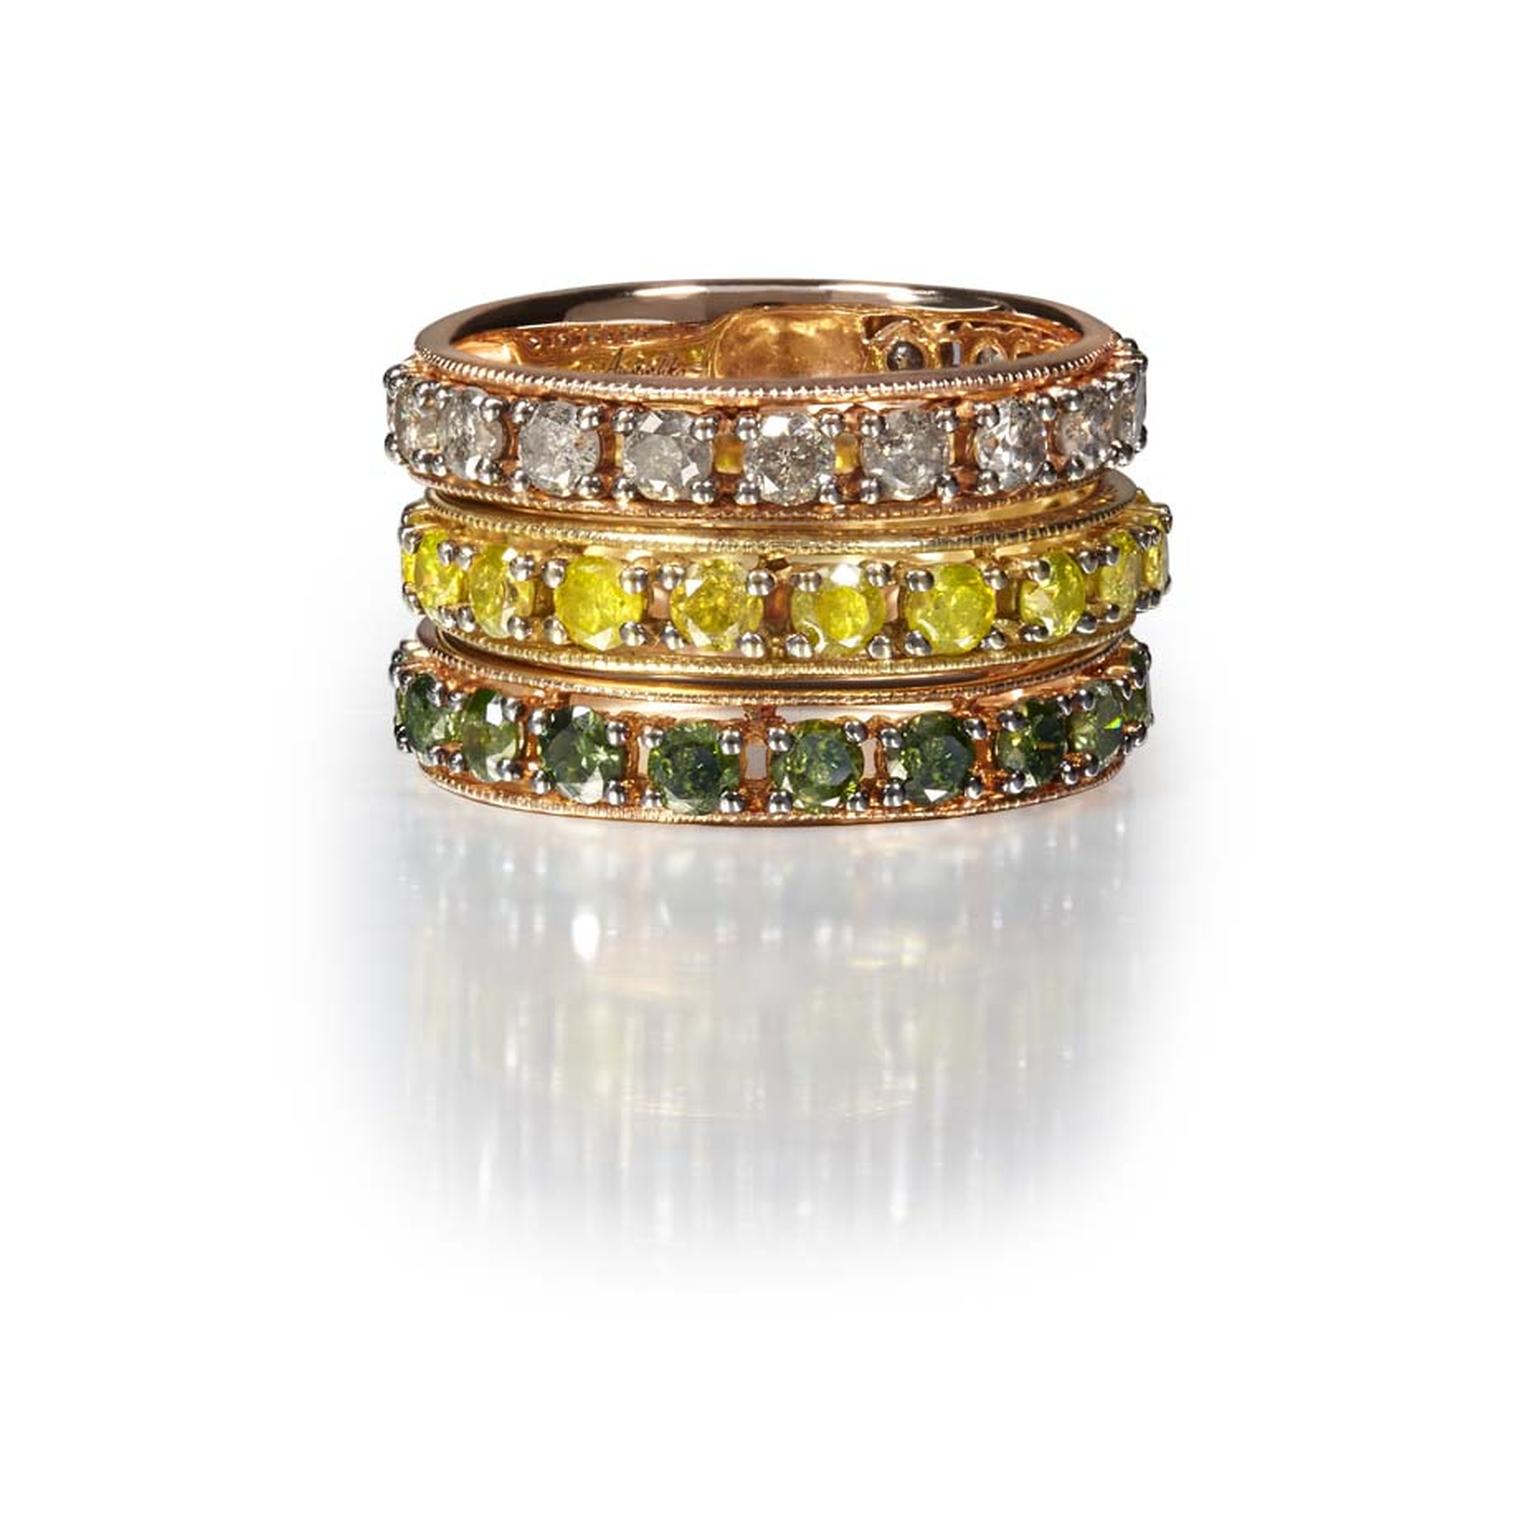 Annoushka stackable Dusty Diamond Eternity rings with white, yellow and green diamonds.